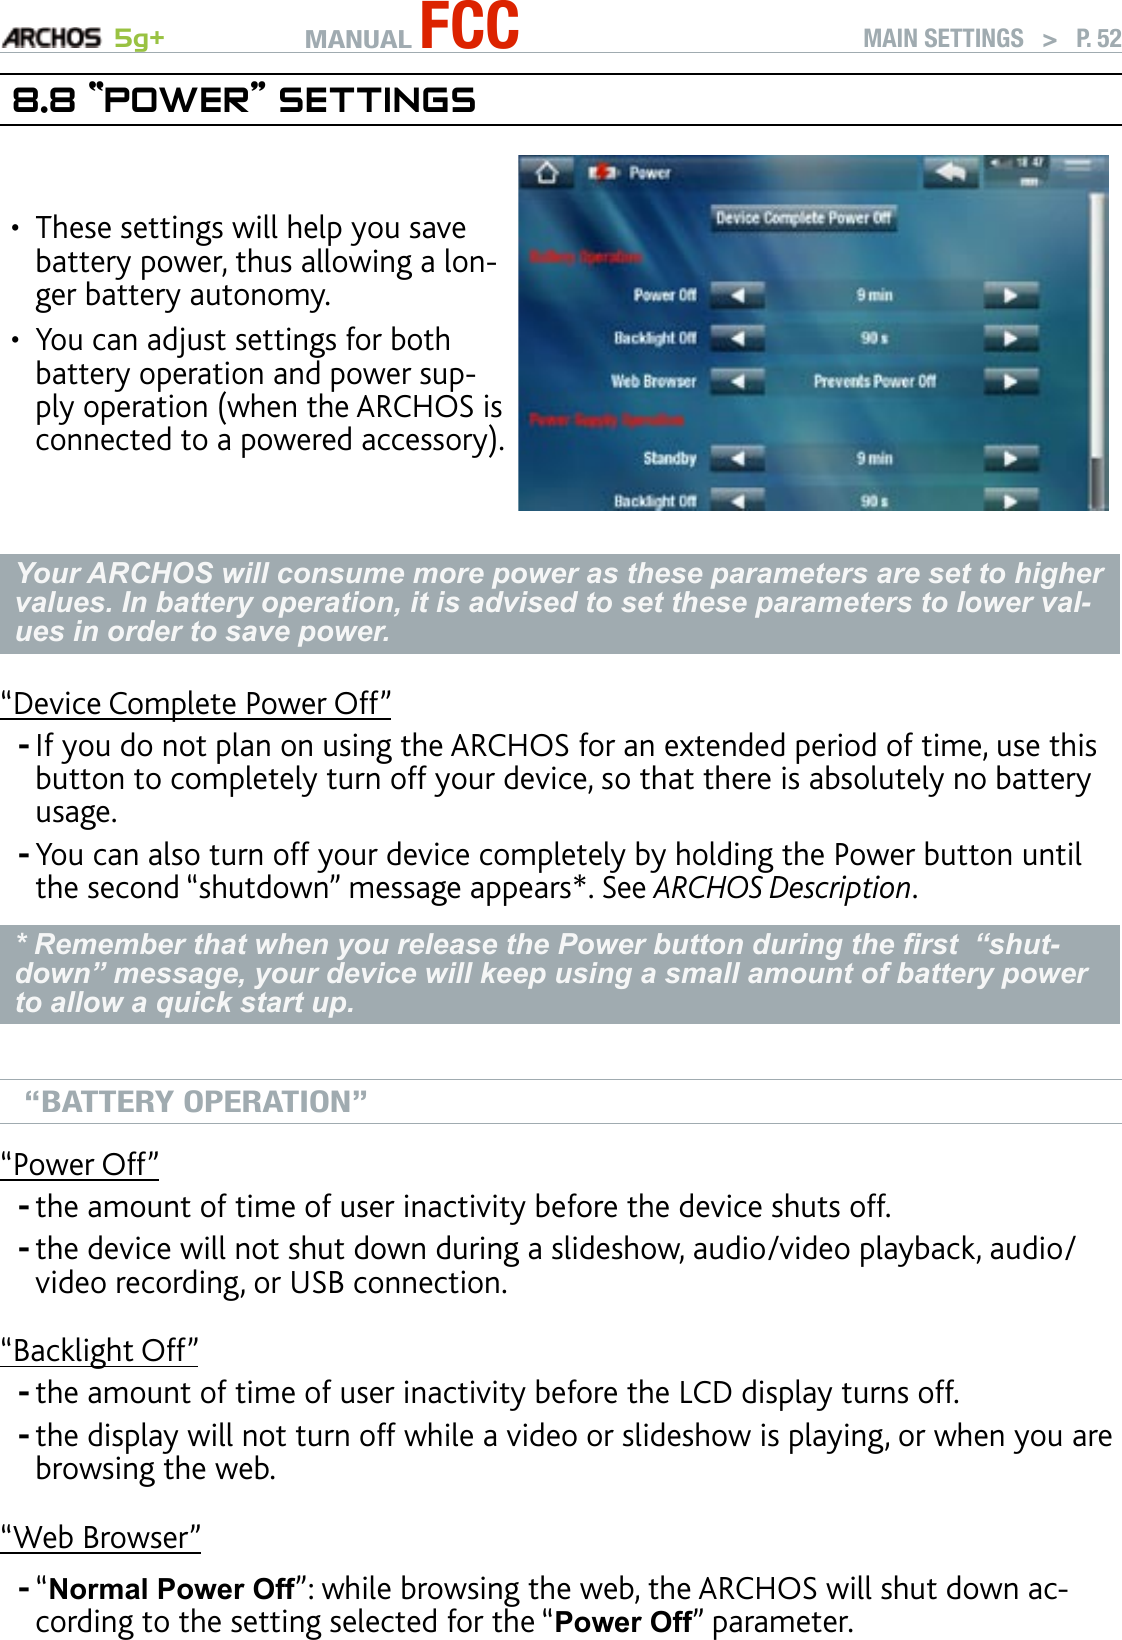 MANUAL FCC 5g+ MAIN SETTINGS   &gt;   P. 528.8 “POwer” seTTIngsThese settings will help you save battery power, thus allowing a lon-ger battery autonomy.You can adjust settings for both battery operation and power sup-ply operation (when the ARCHOS is connected to a powered accessory).••Your ARCHOS will consume more power as these parameters are set to higher values. In battery operation, it is advised to set these parameters to lower val-ues in order to save power.“Device Complete Power Off”If you do not plan on using the ARCHOS for an extended period of time, use this button to completely turn off your device, so that there is absolutely no battery usage. You can also turn off your device completely by holding the Power button until the second “shutdown” message appears*. See ARCHOS Description.* Remember that when you release the Power button during the rst  “shut-down” message, your device will keep using a small amount of battery power to allow a quick start up. “BATTERY OPERATION”“Power Off”the amount of time of user inactivity before the device shuts off.the device will not shut down during a slideshow, audio/video playback, audio/video recording, or USB connection.“Backlight Off”the amount of time of user inactivity before the LCD display turns off.the display will not turn off while a video or slideshow is playing, or when you are browsing the web.“Web Browser”“Normal Power Off”: while browsing the web, the ARCHOS will shut down ac-cording to the setting selected for the “Power Off” parameter.-------